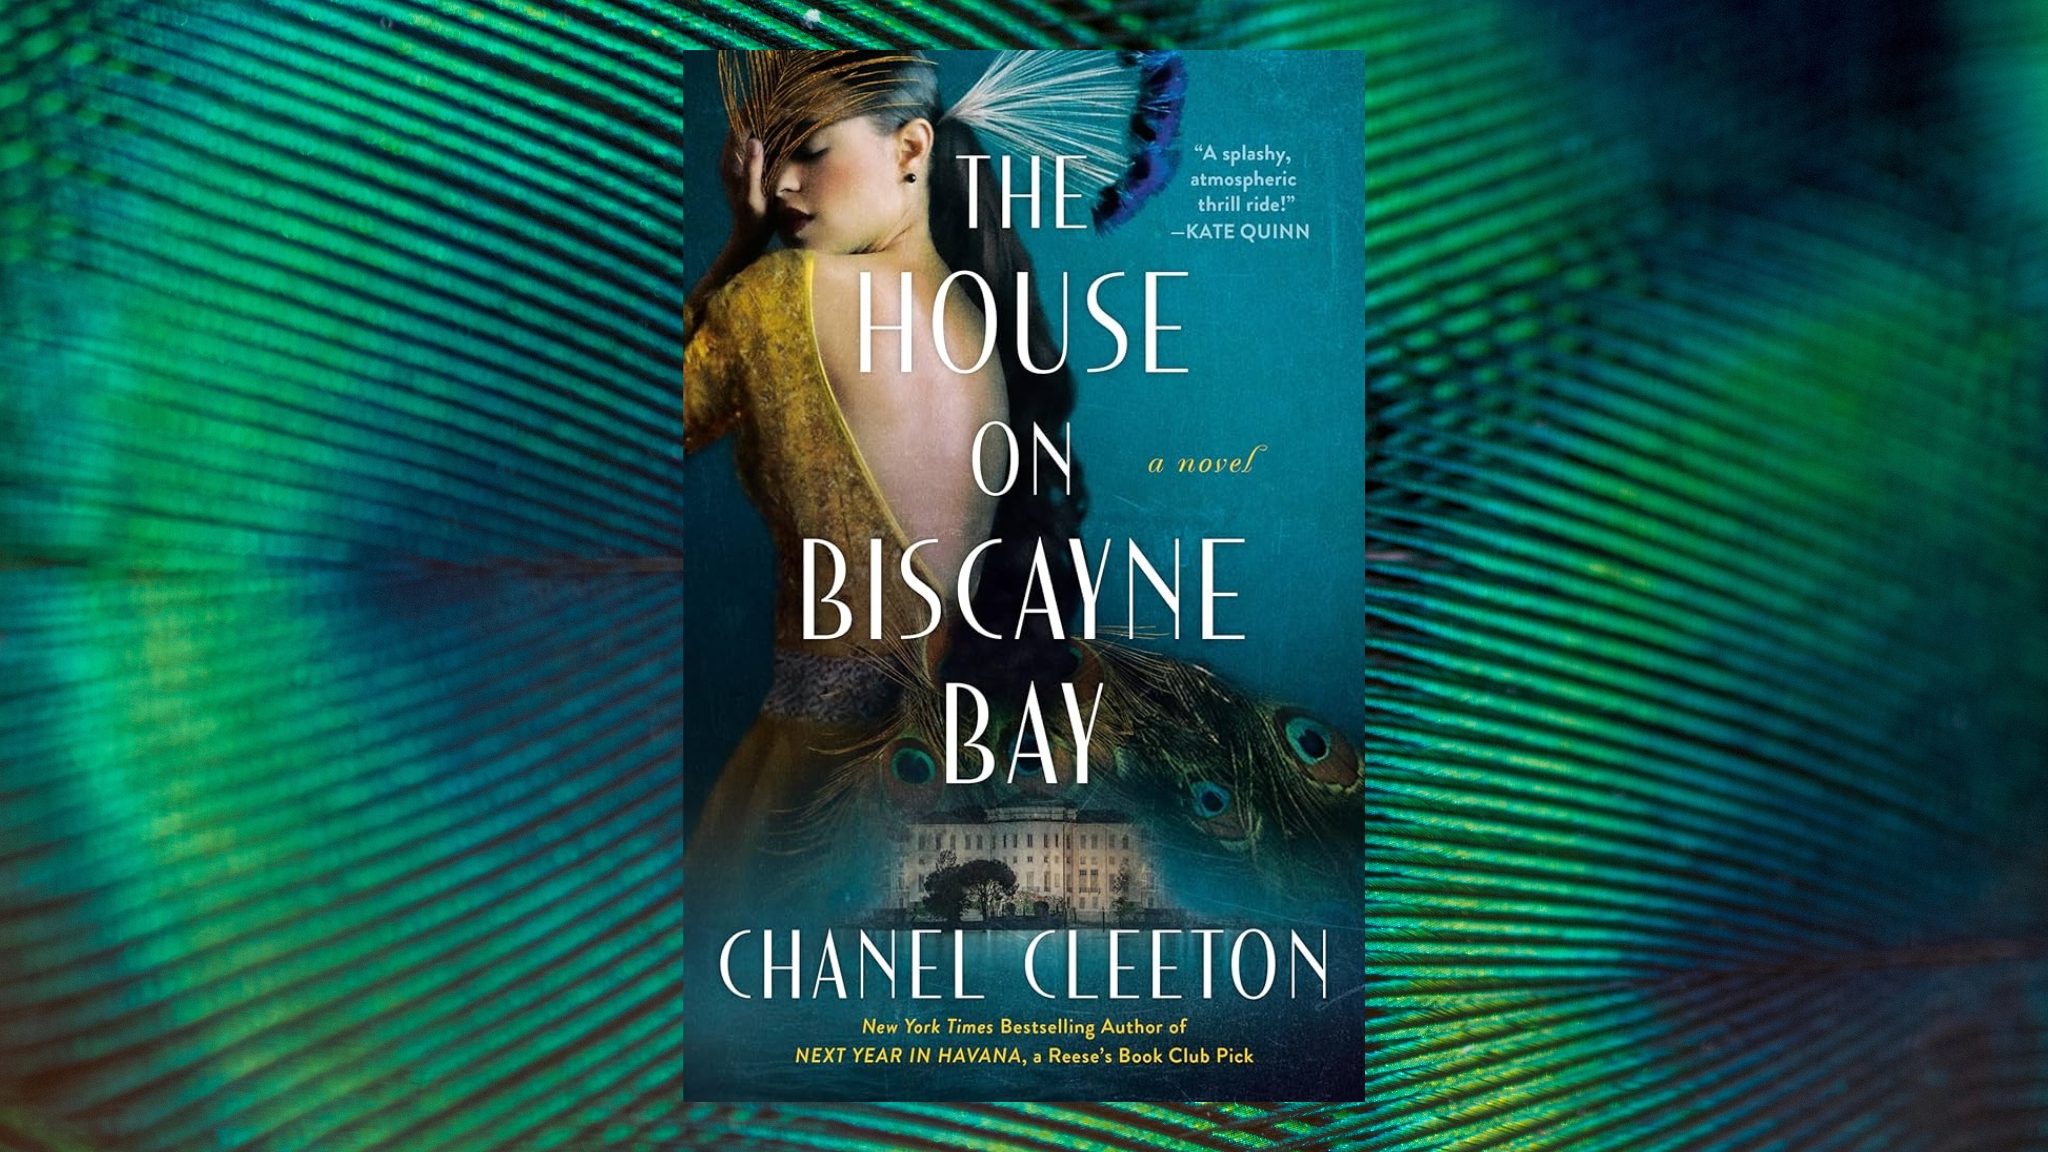 The House on Biscayne Bay by Chanel Cleeton